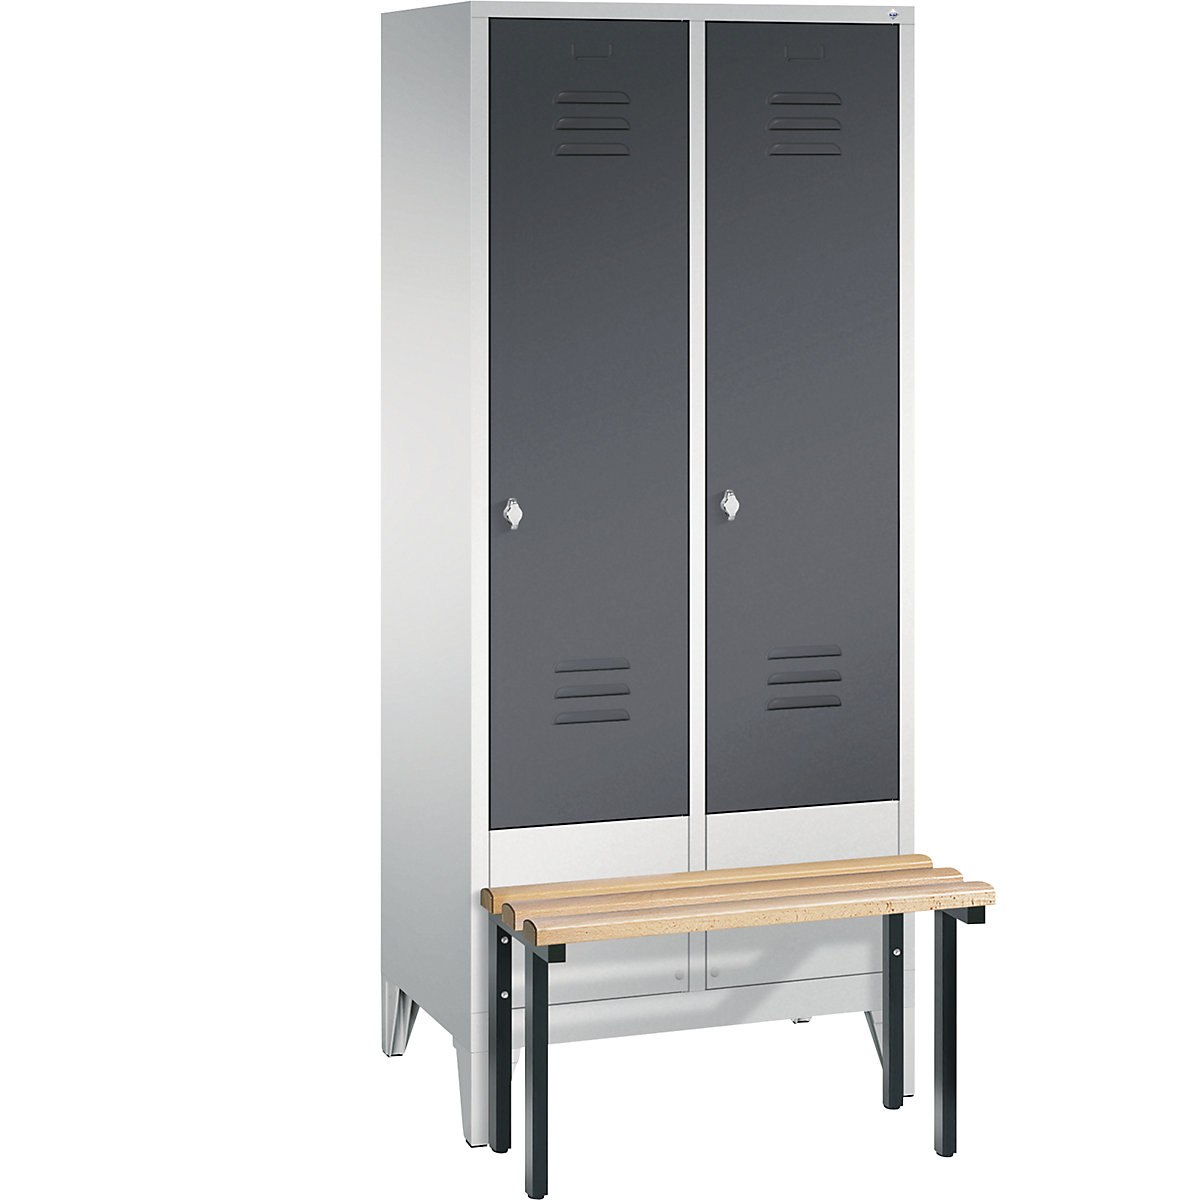 CLASSIC cloakroom locker with bench mounted in front – C+P, 2 compartments, compartment width 400 mm, light grey / black grey-7